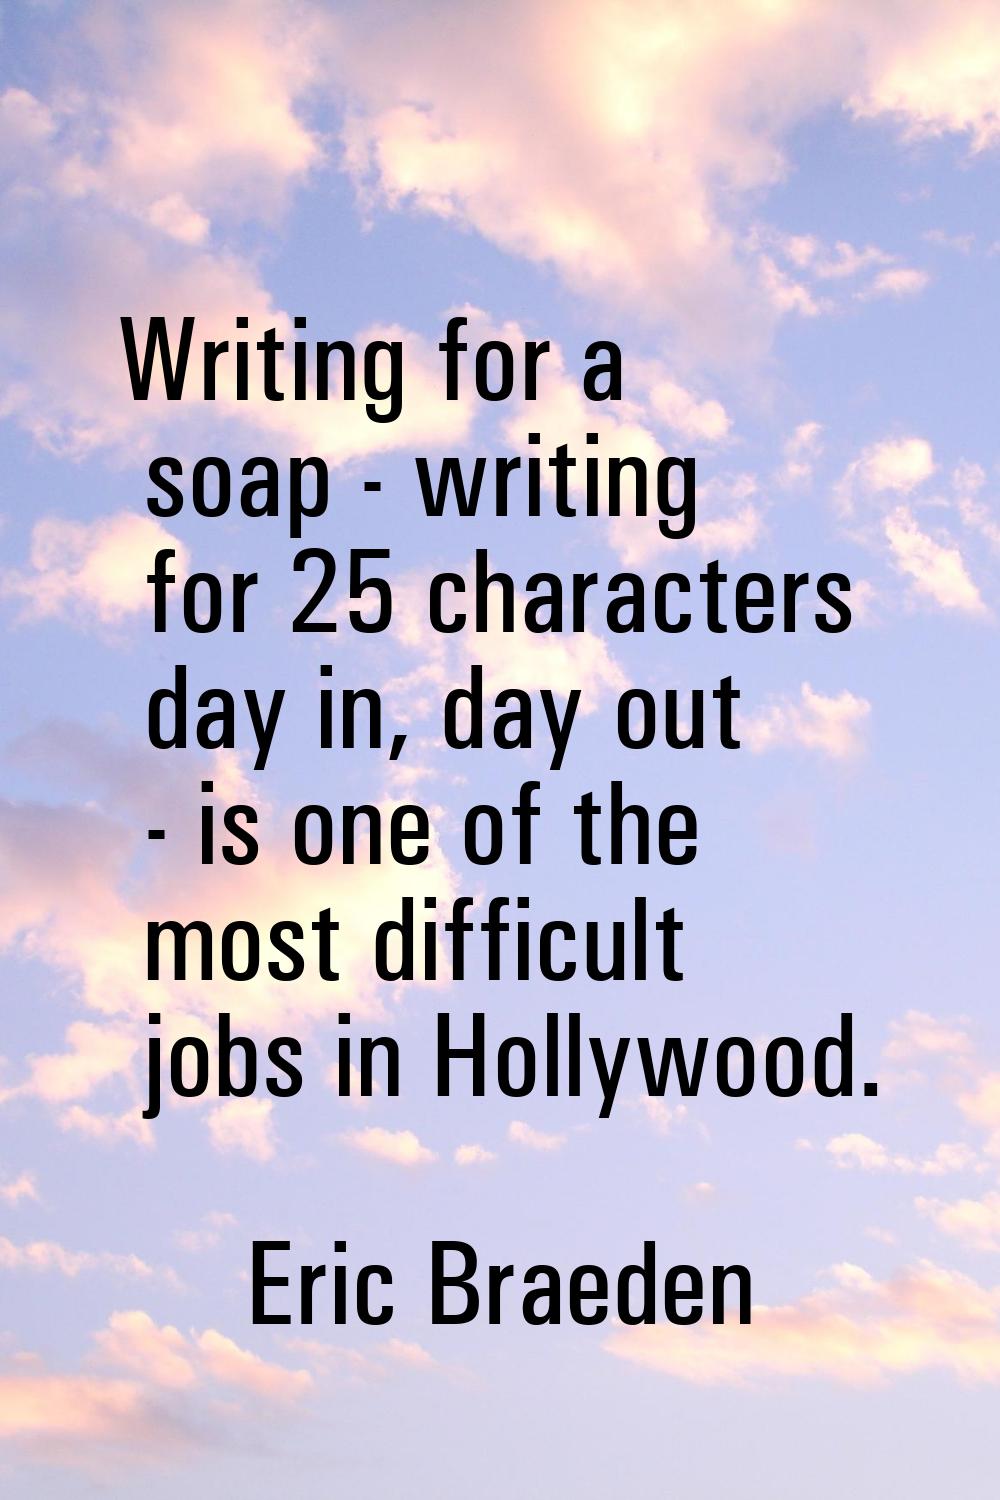 Writing for a soap - writing for 25 characters day in, day out - is one of the most difficult jobs 